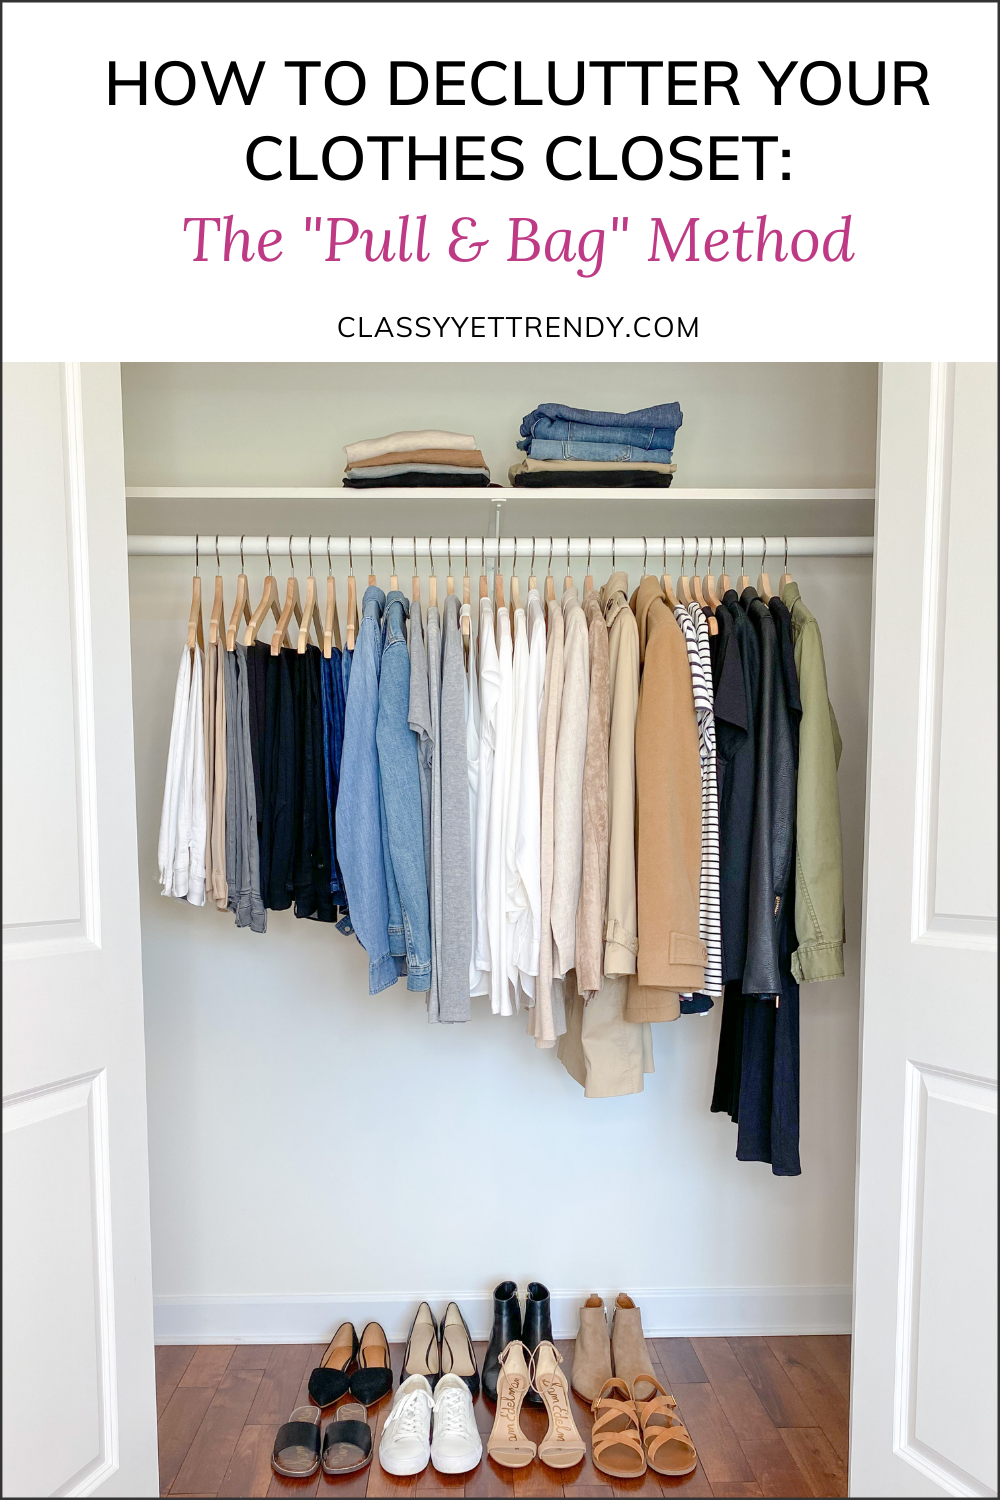 Capsule wardrobe: How to declutter your life and closet